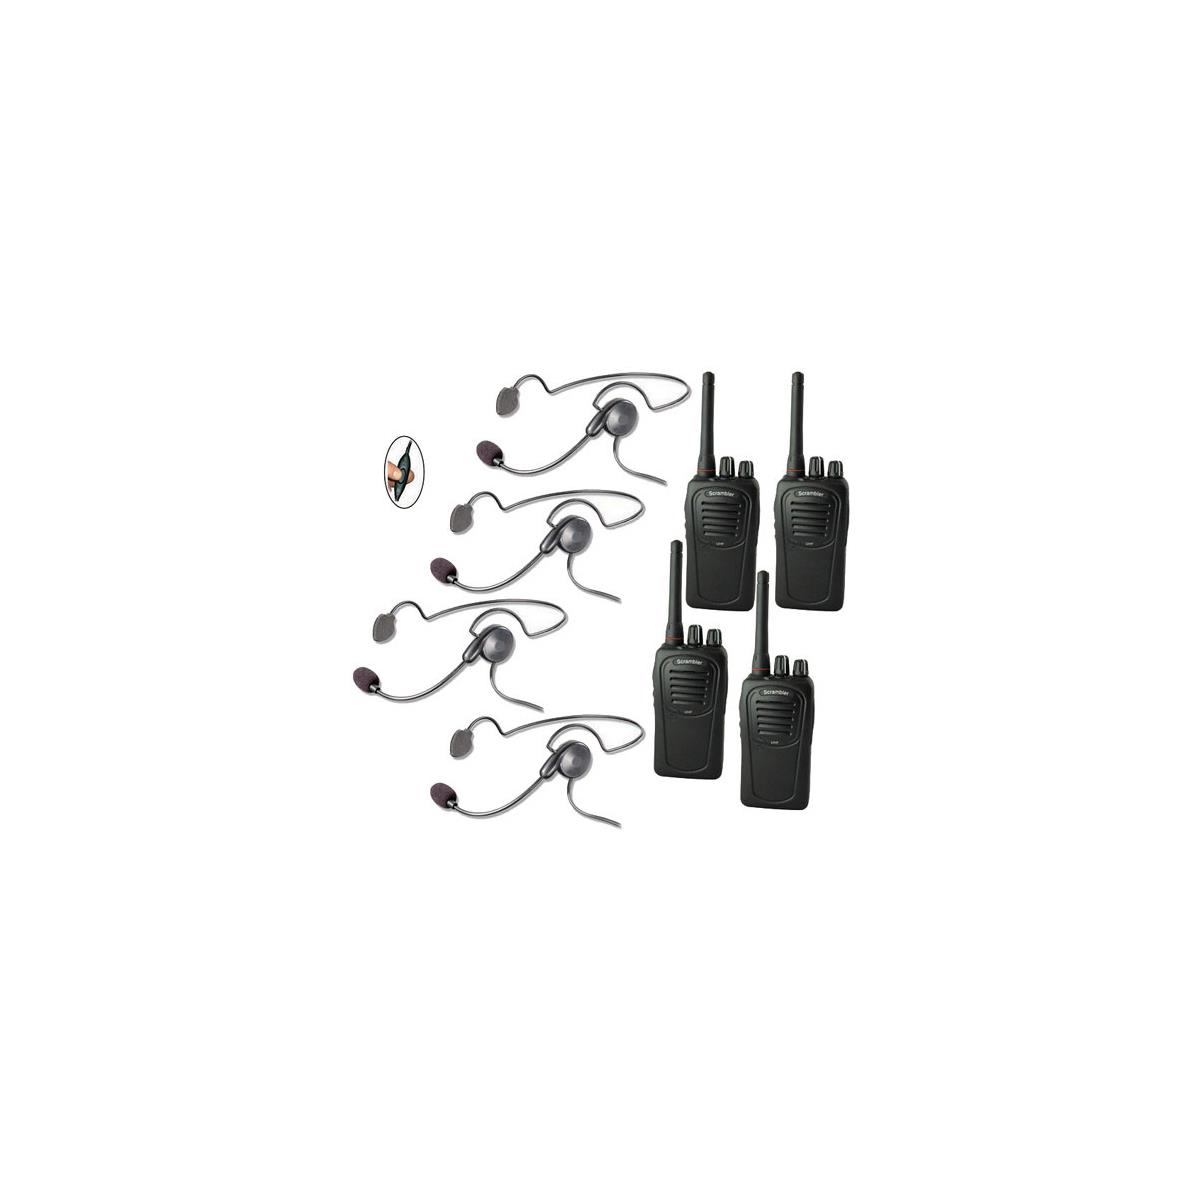 Image of Eartec SC-1000 4-User Two-Way Radio System with 4x Cyber Inline PTT Headsets